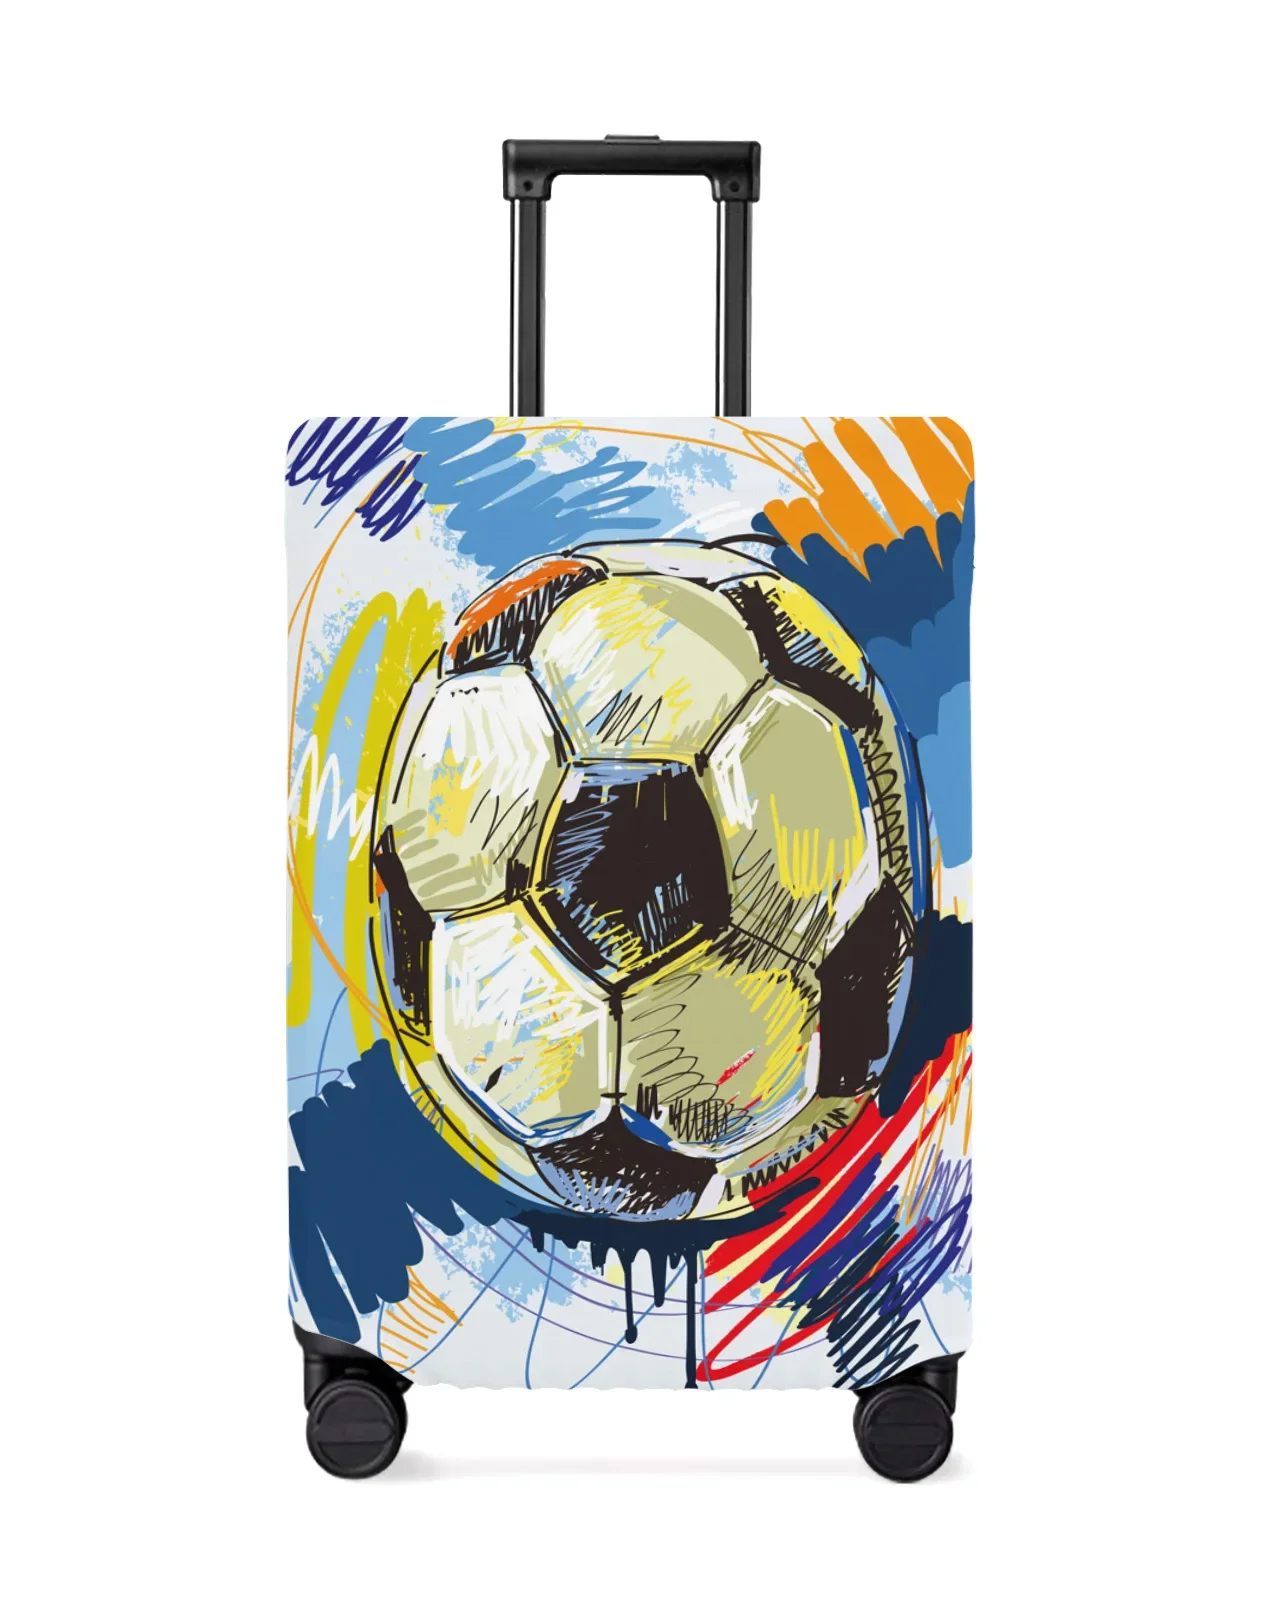 football-watercolor-brush-sport-soccer-luggage-protective-cover-travel-accessories-suitcase-elastic-dust-case-protect-sleeve